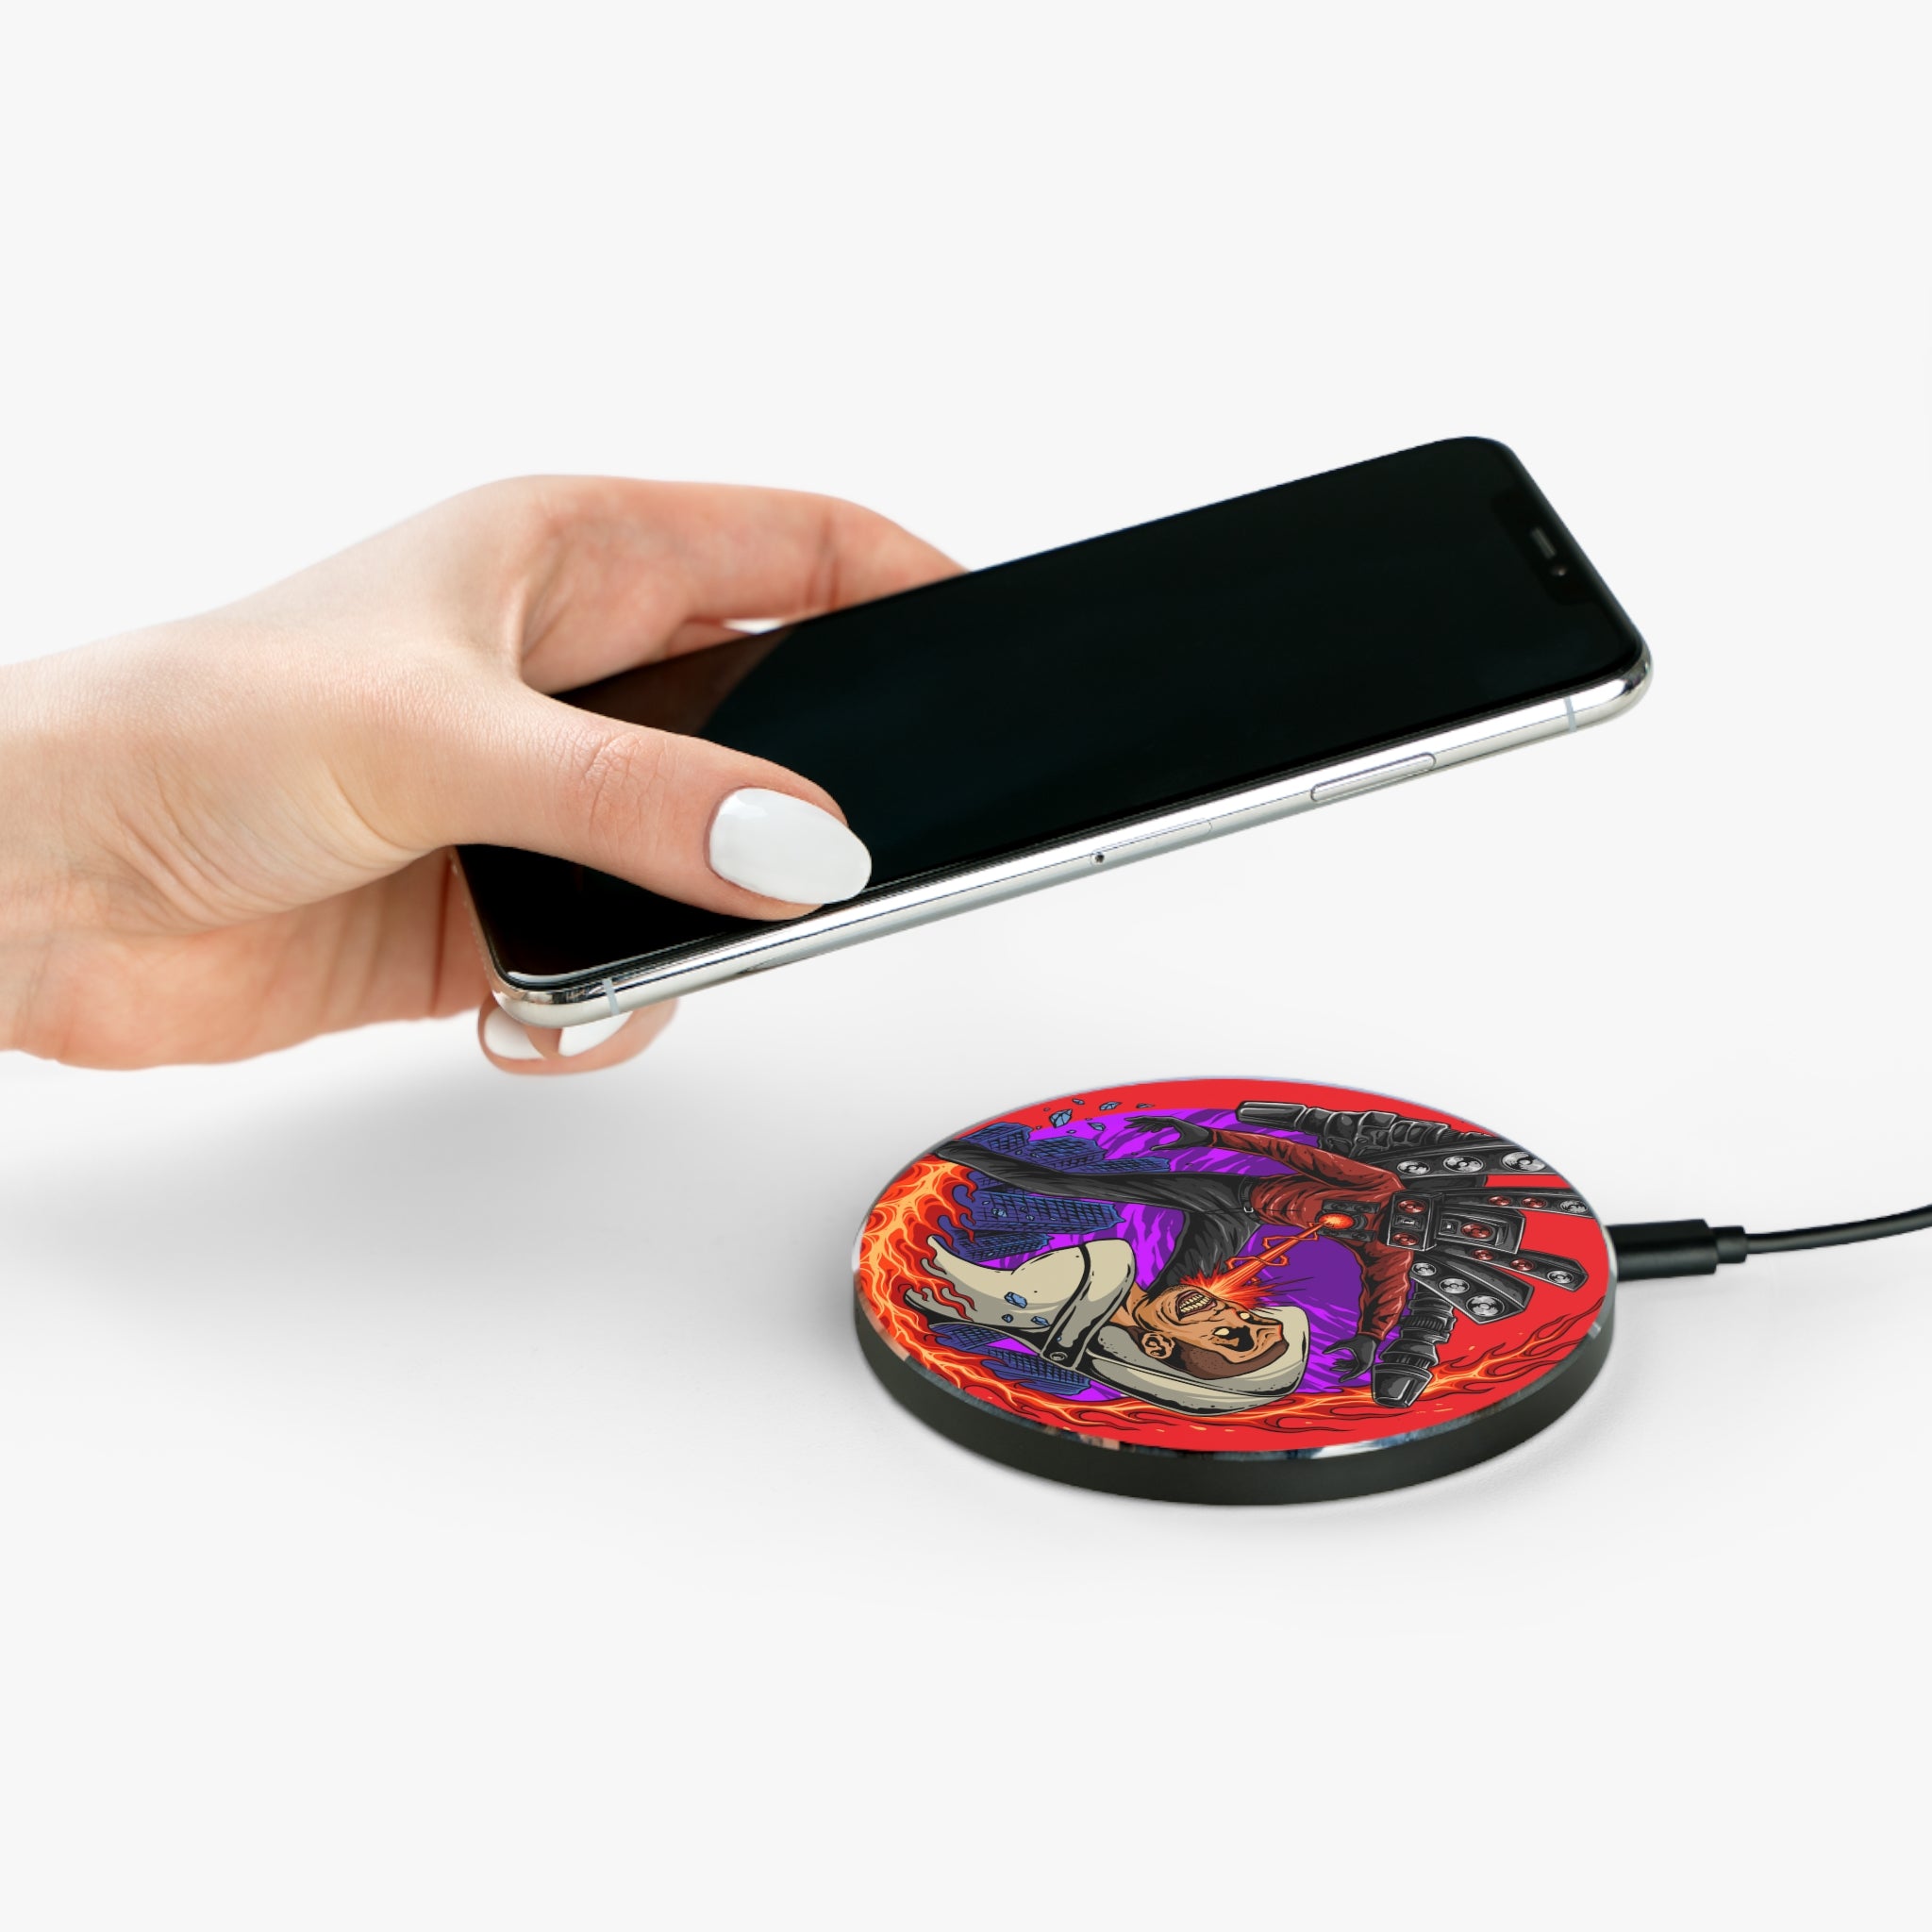 Speaker Blast Wireless charger showcasing Titan Speakerman's epic battle on white background With Person holding the phone over it 